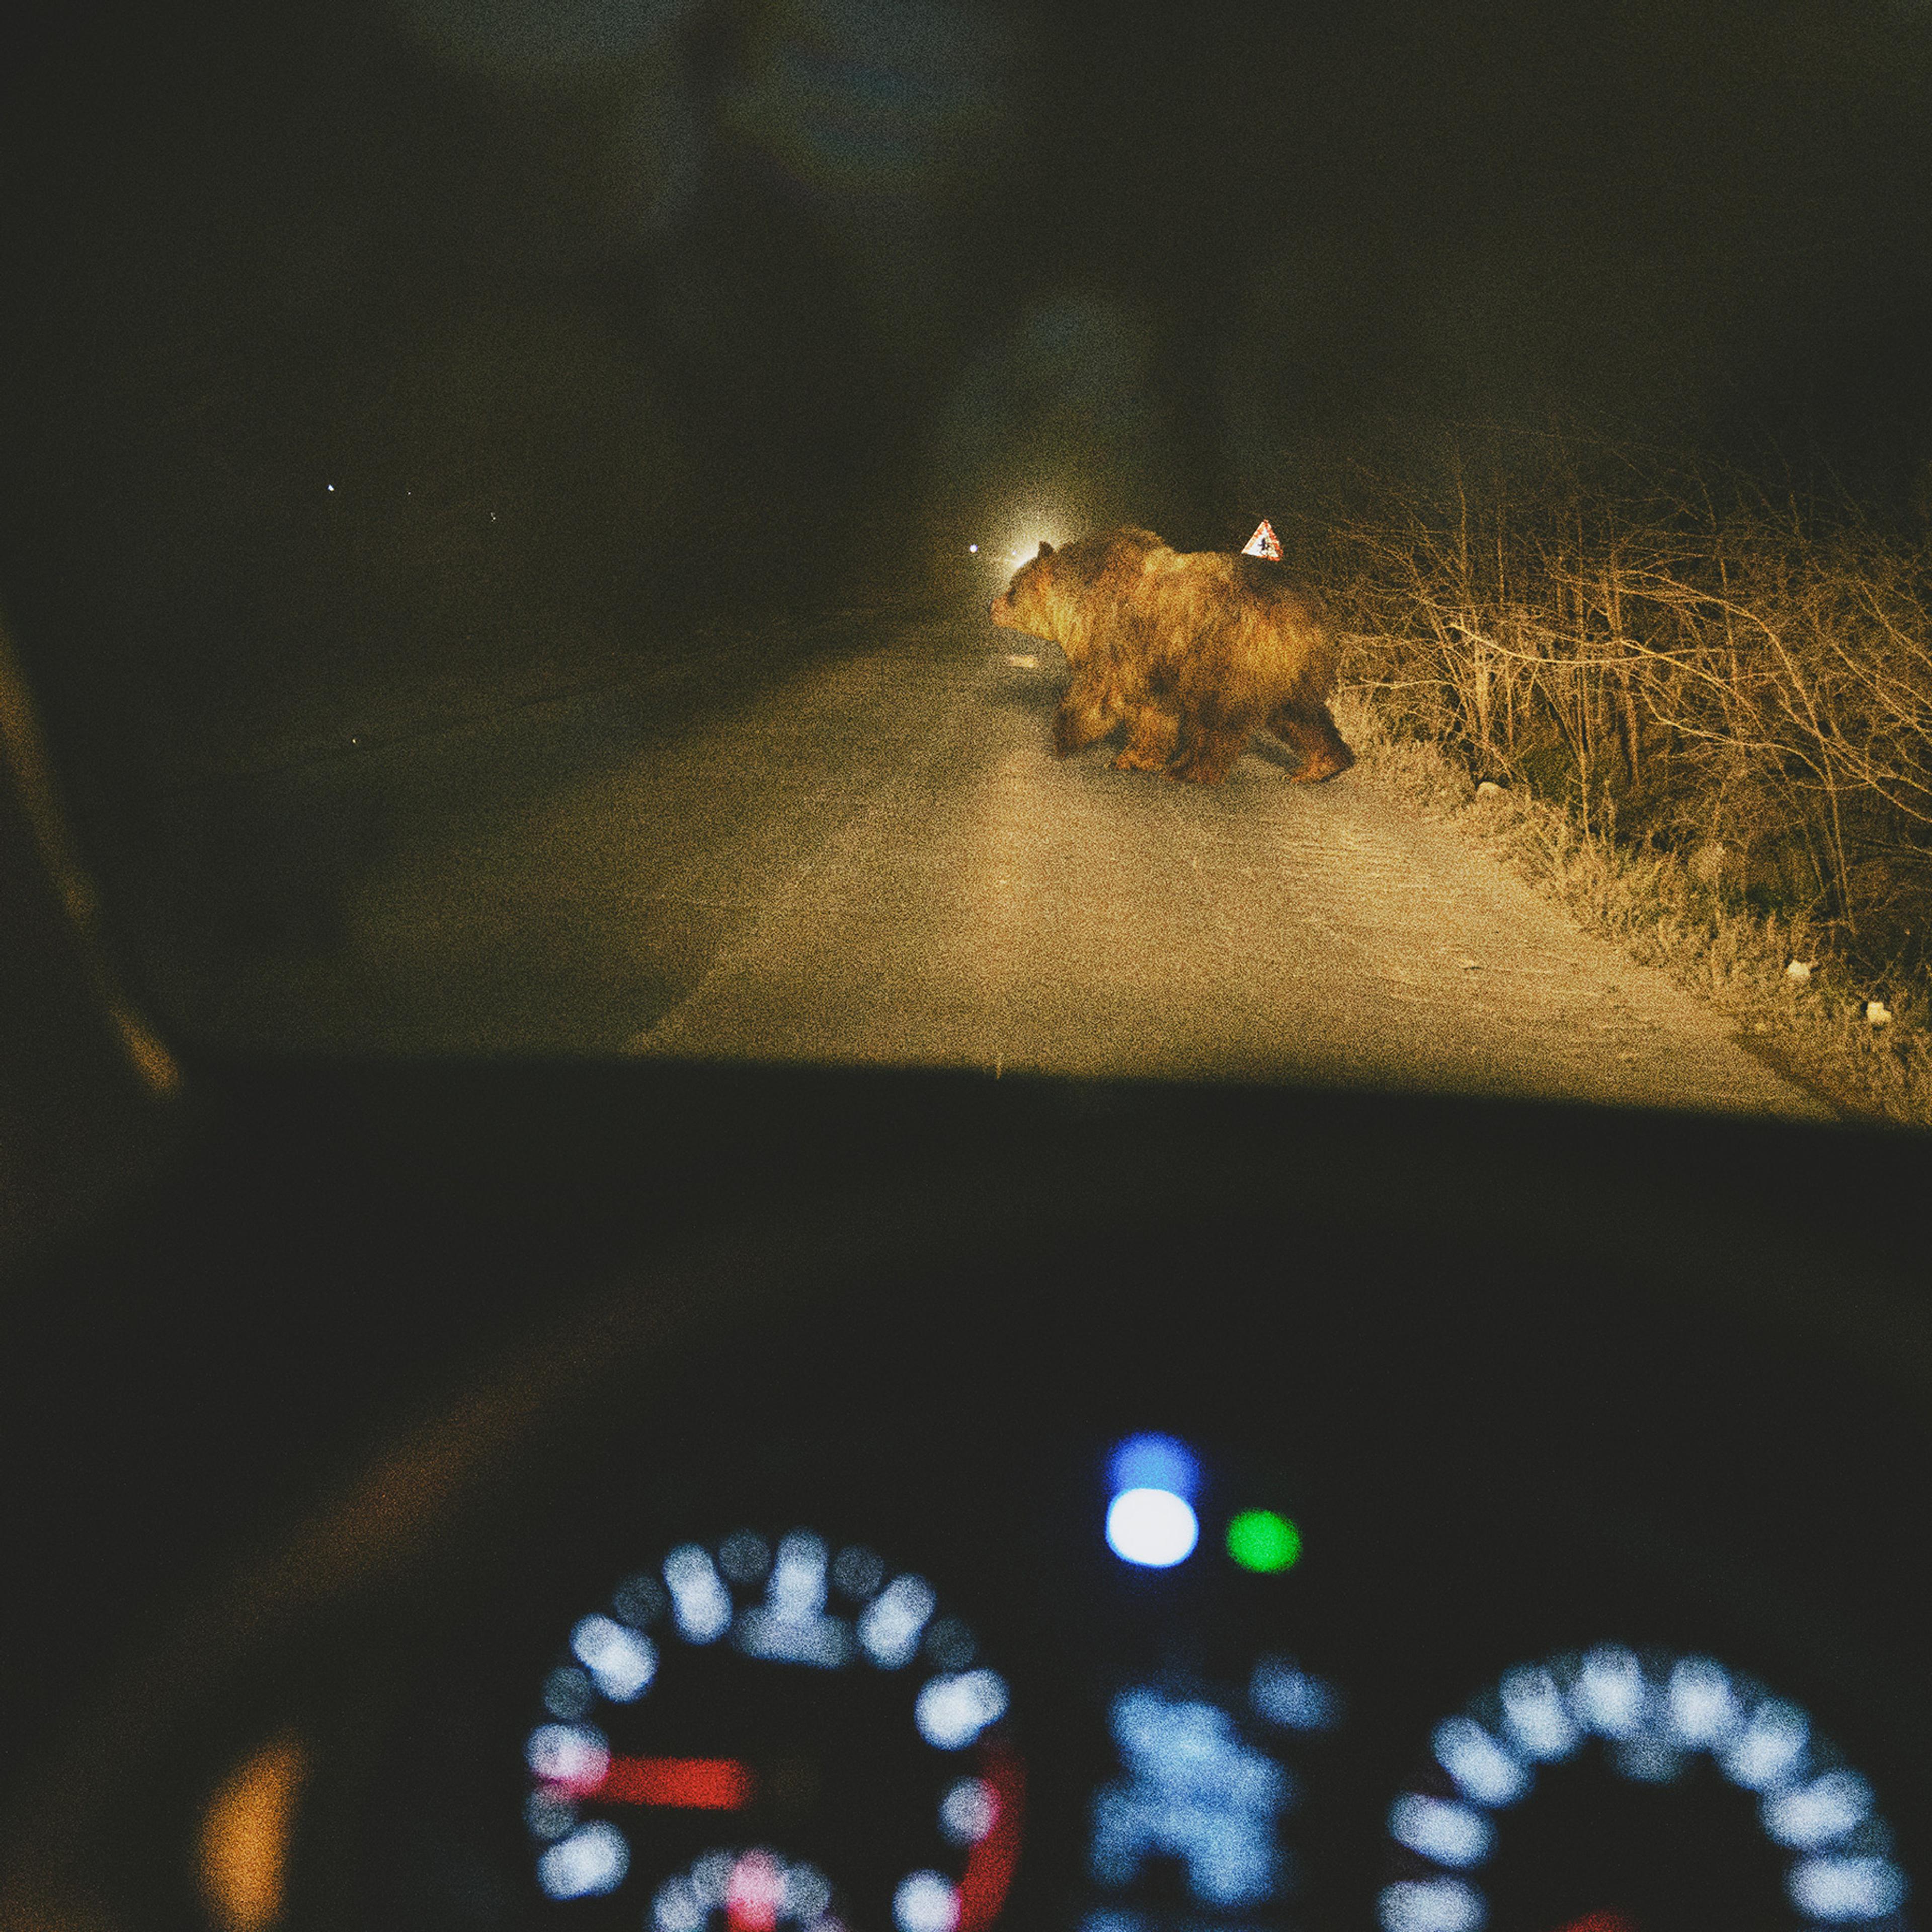 Seen through the windscreen a large bear is crossing a country road at night caught in the headlights of a car